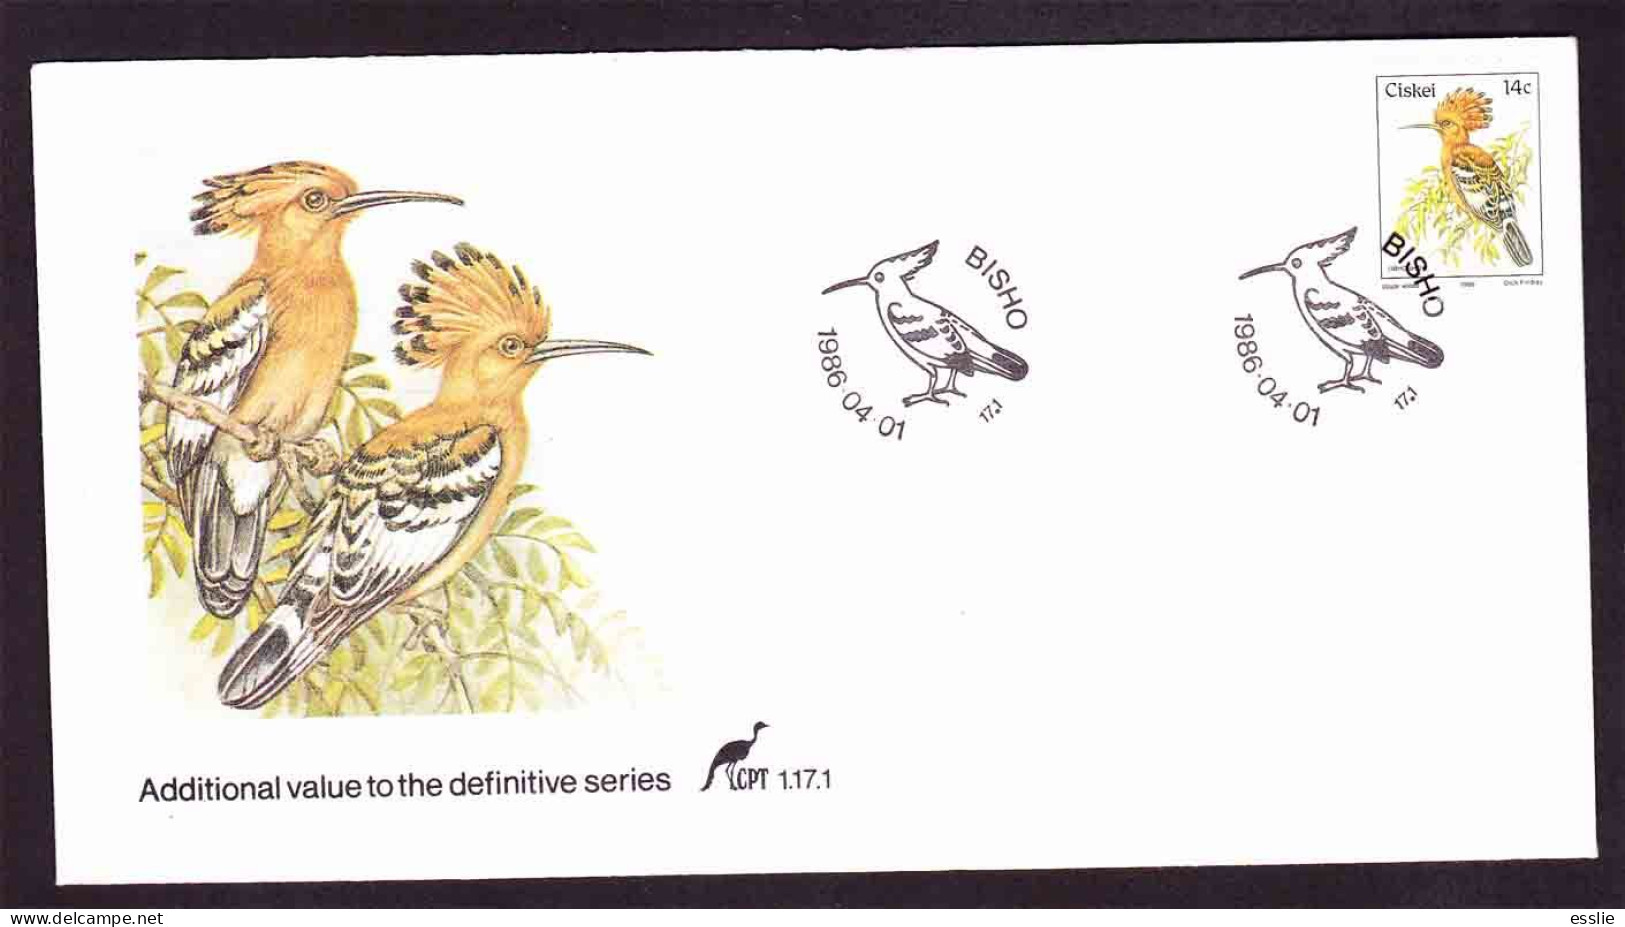 Ciskei - 1986 (1981) - Birds First Definitive - Additional Value - Hoopoe - First Day Cover - Small - Cuculi, Turaco